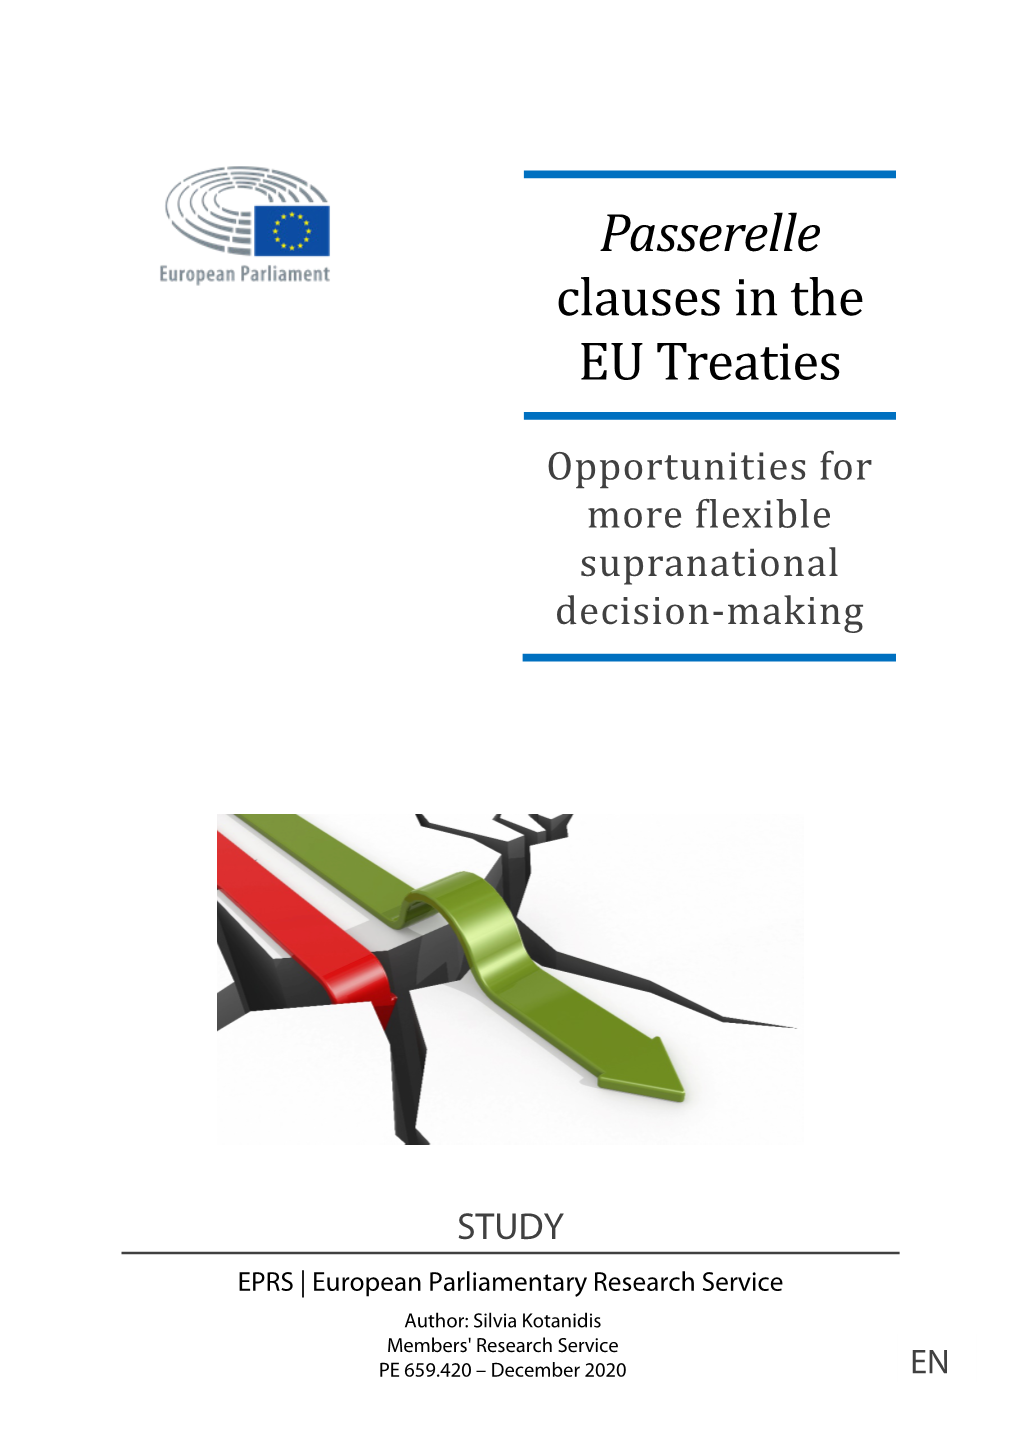 Passerelle Clauses in the EU Treaties